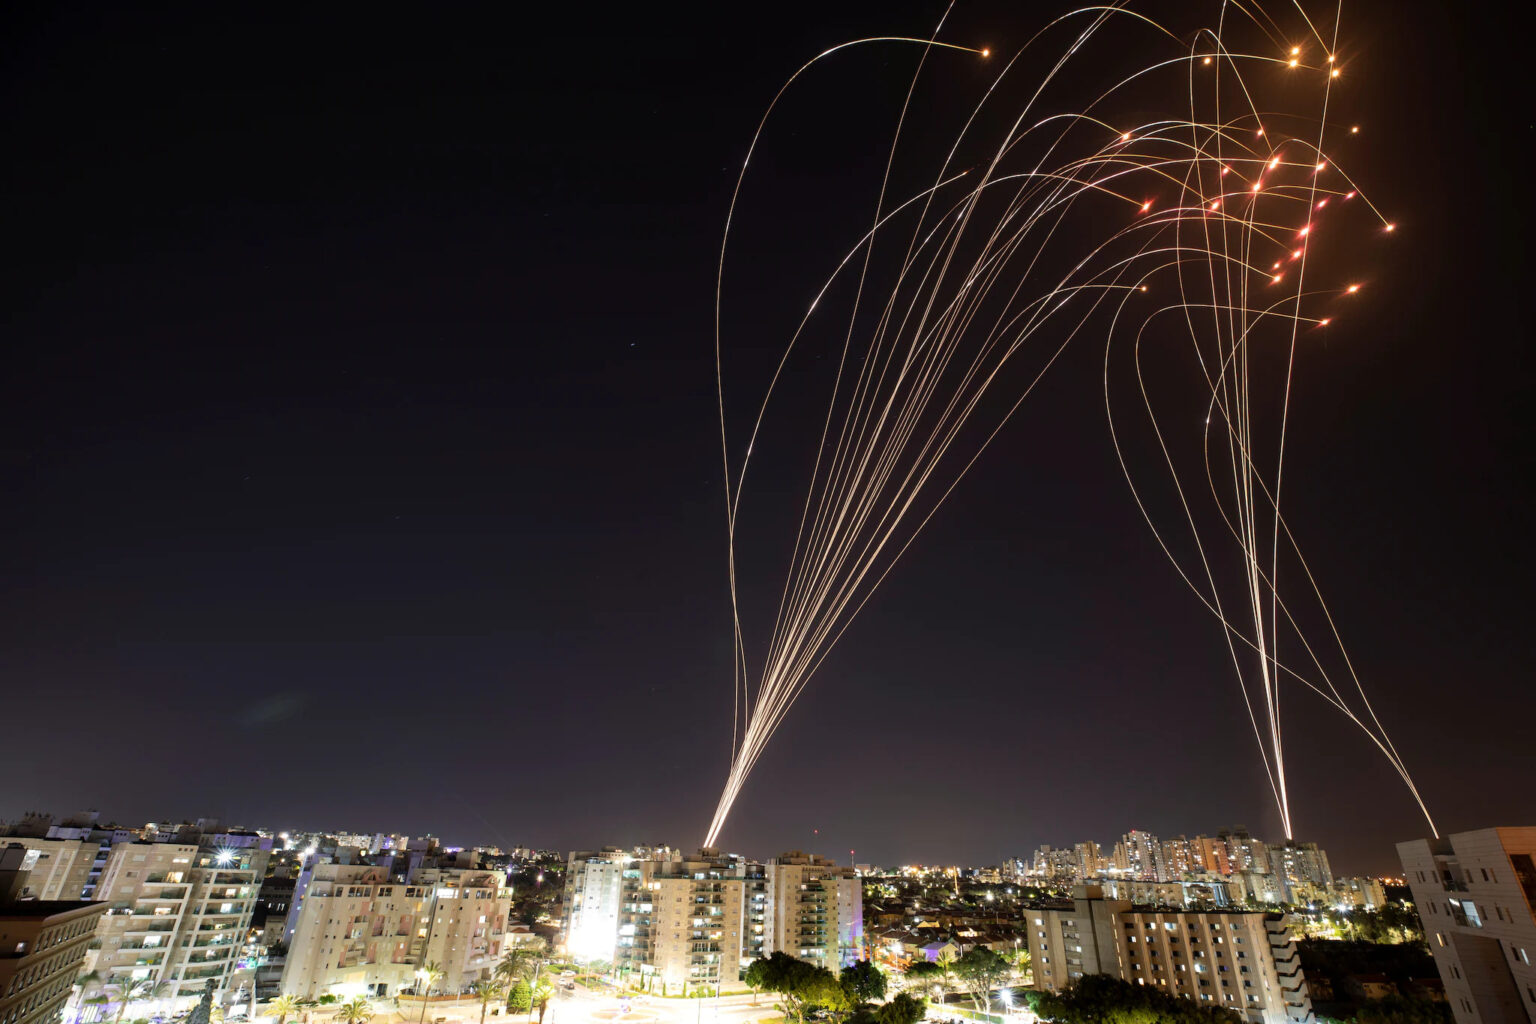 Streaks of light are seen as Israel's Iron Dome anti-missile system intercept rockets launched from the Gaza Strip towards Israel, as seen from Ashkelon, Israel May 12, 2021. REUTERS/Amir Cohen